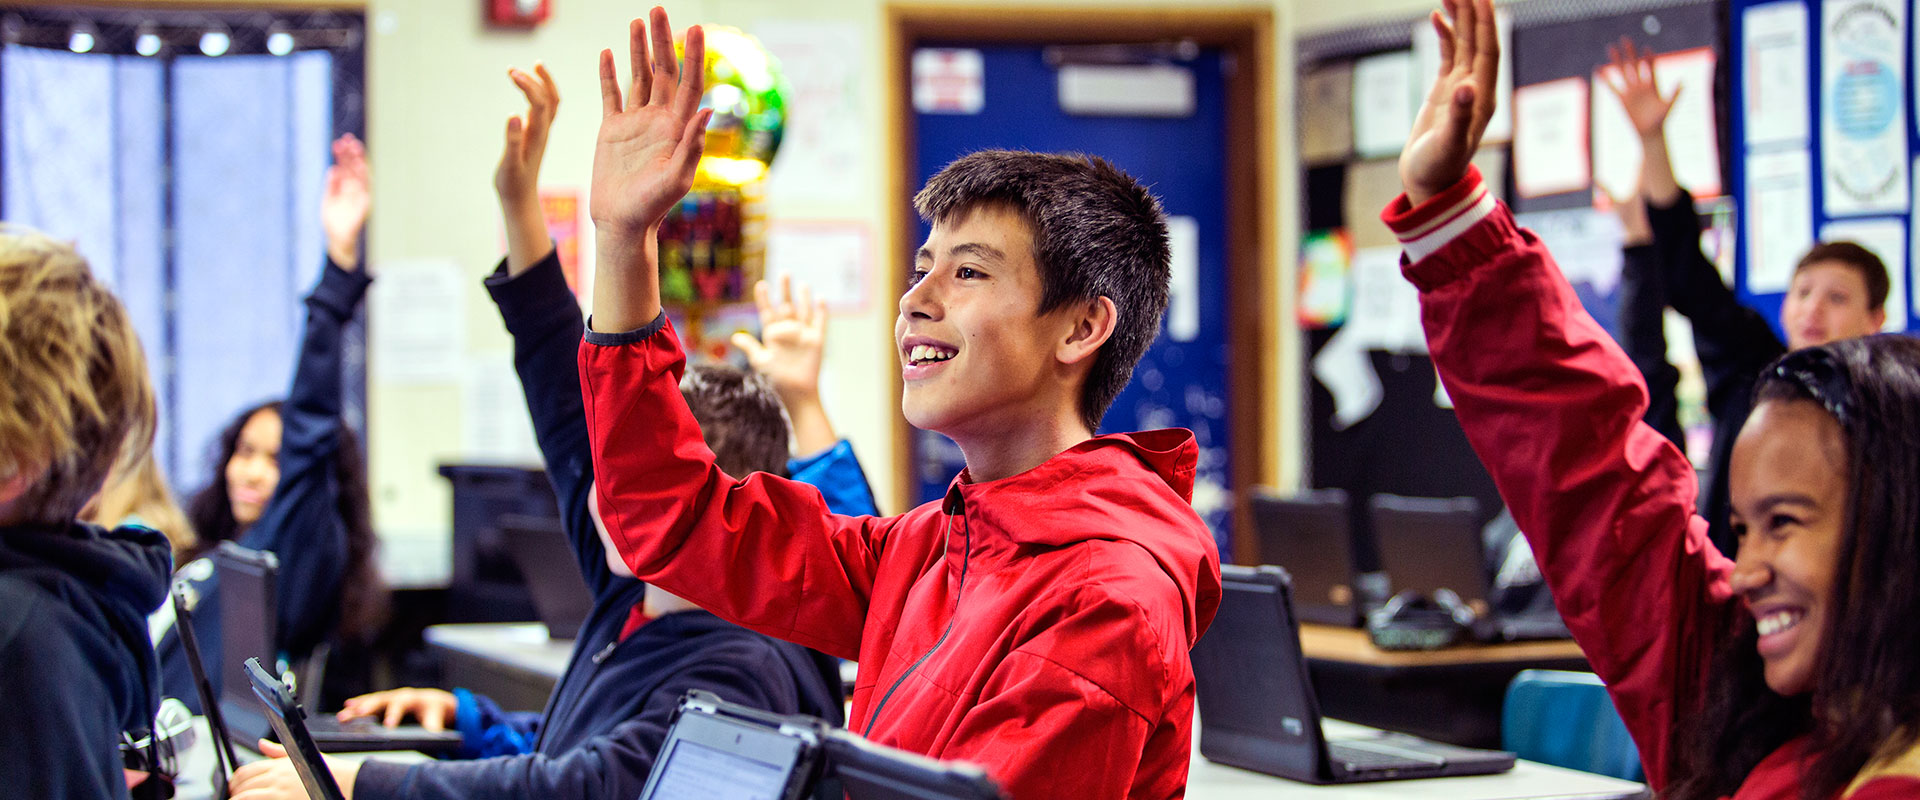 Elementary students in a computer lab raising their hands and smiling